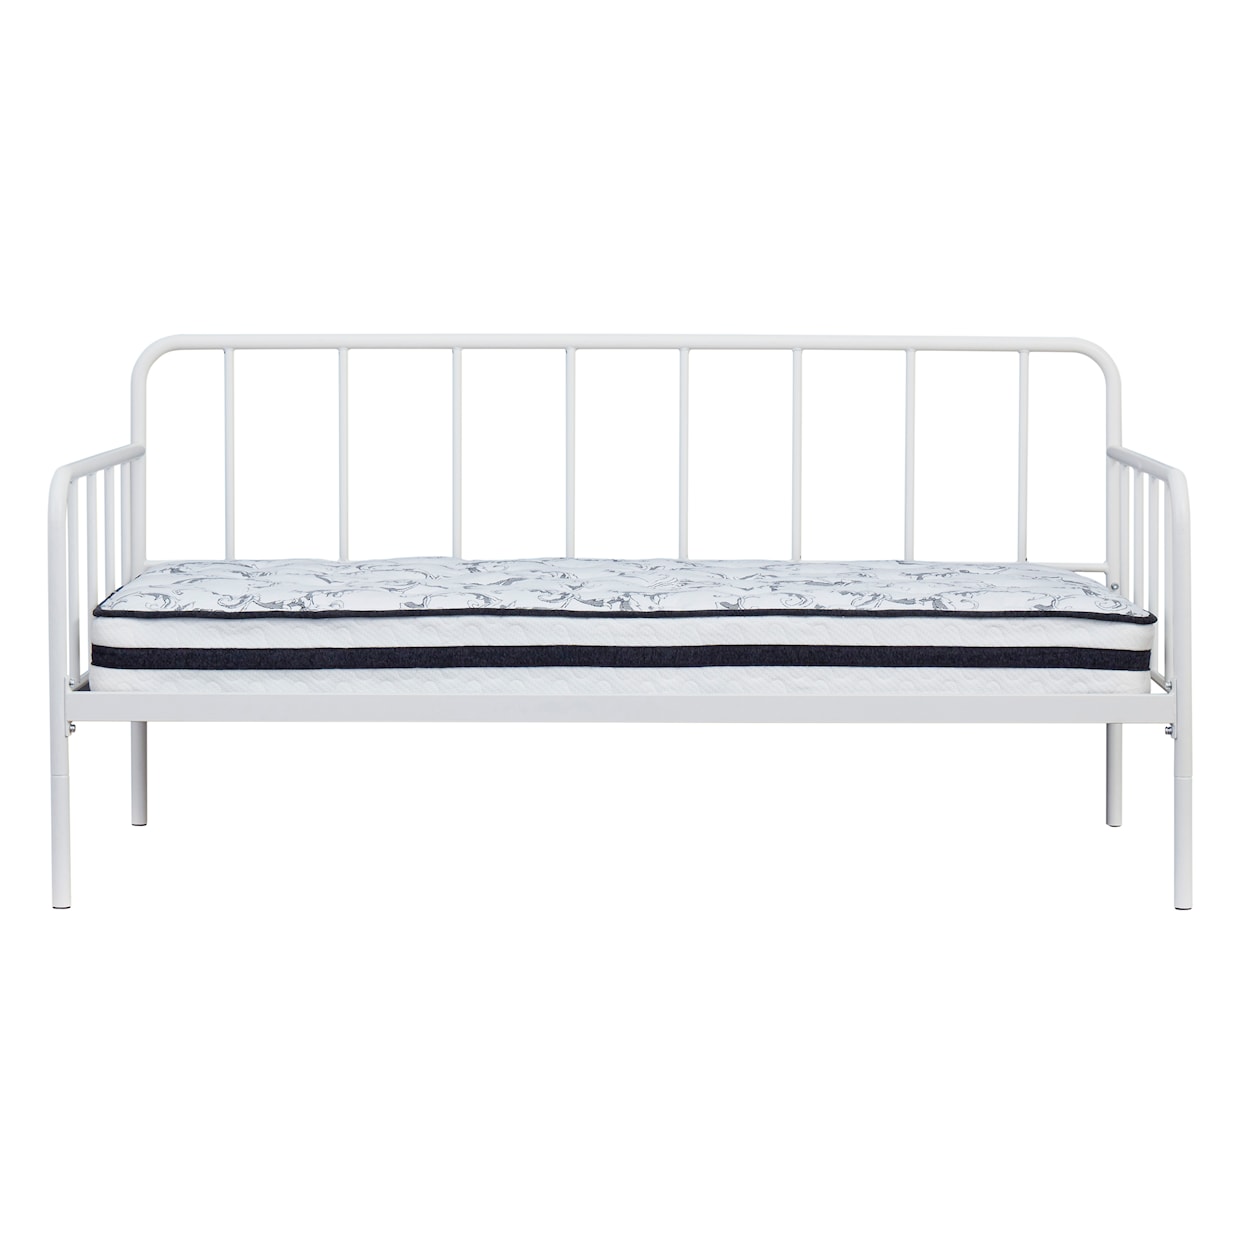 Signature Design by Ashley Furniture Trentlore Twin Metal Day Bed with Platform